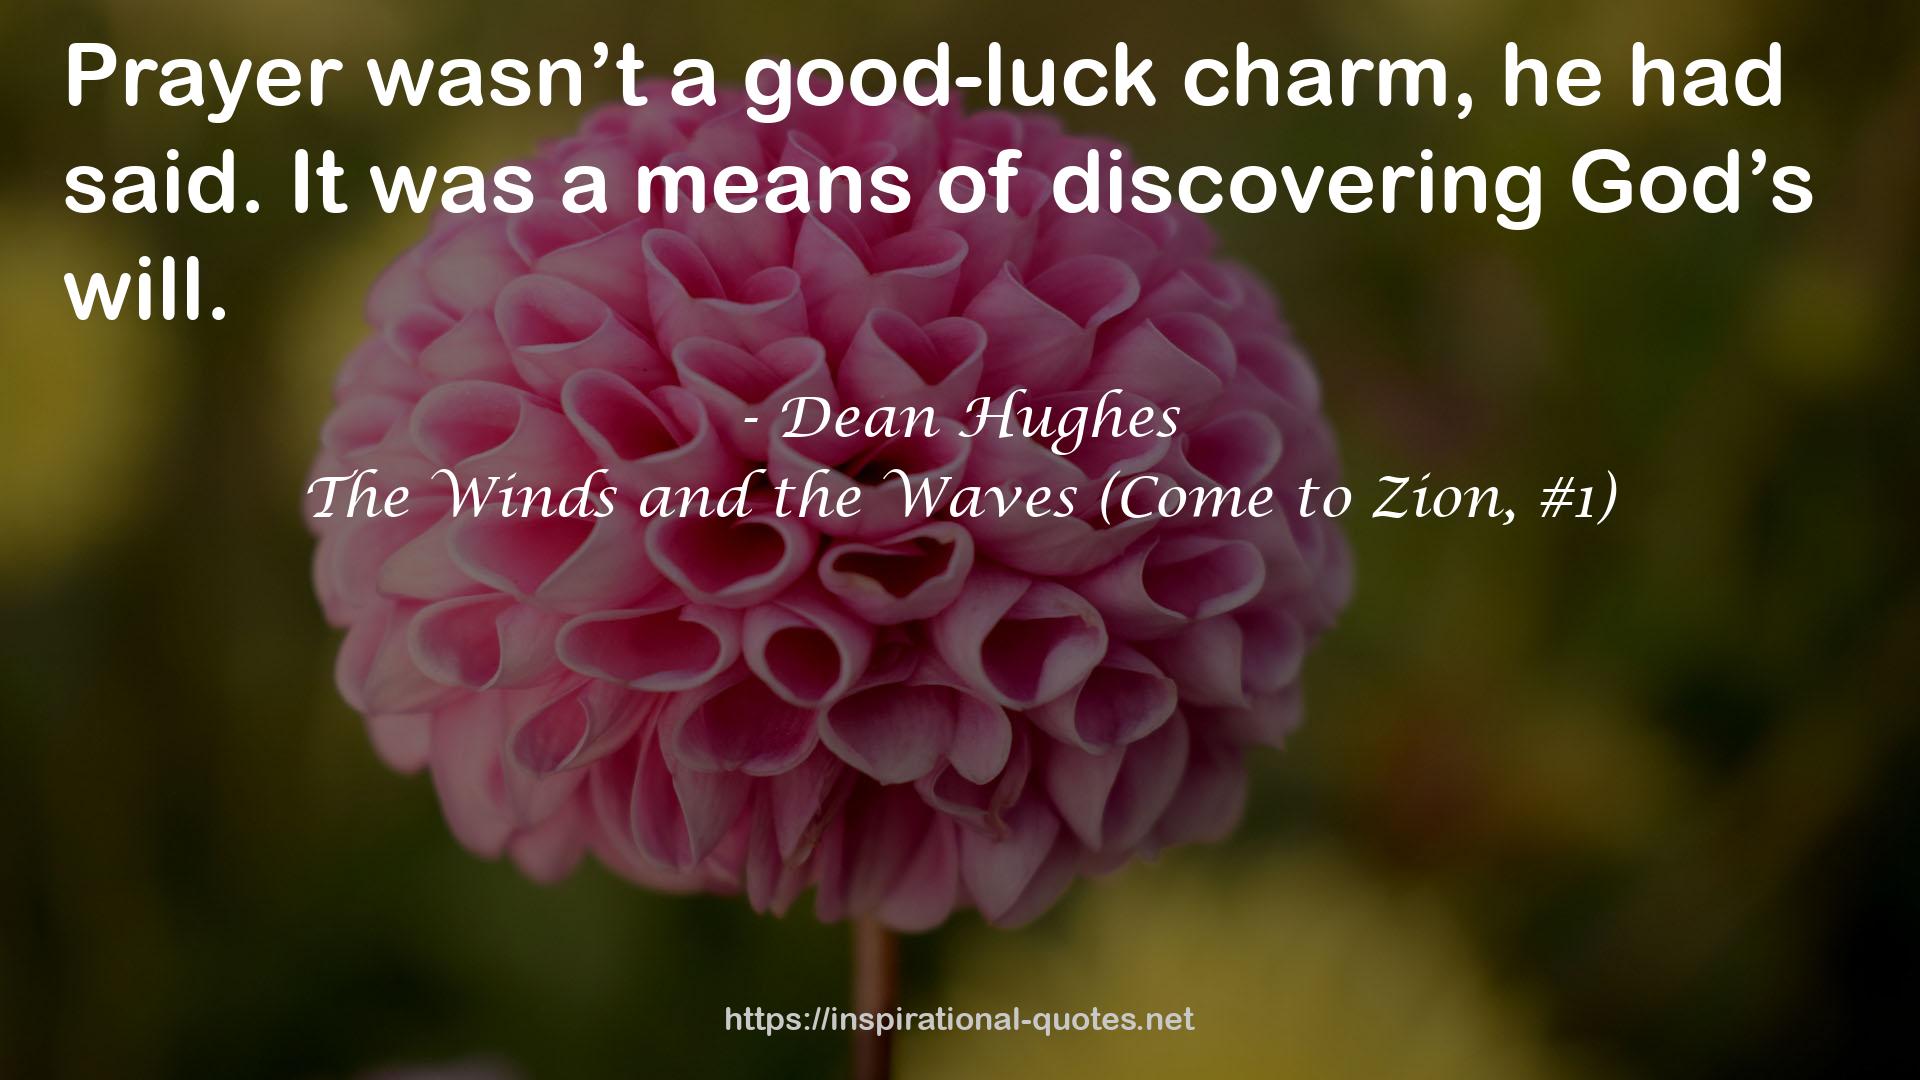 The Winds and the Waves (Come to Zion, #1) QUOTES